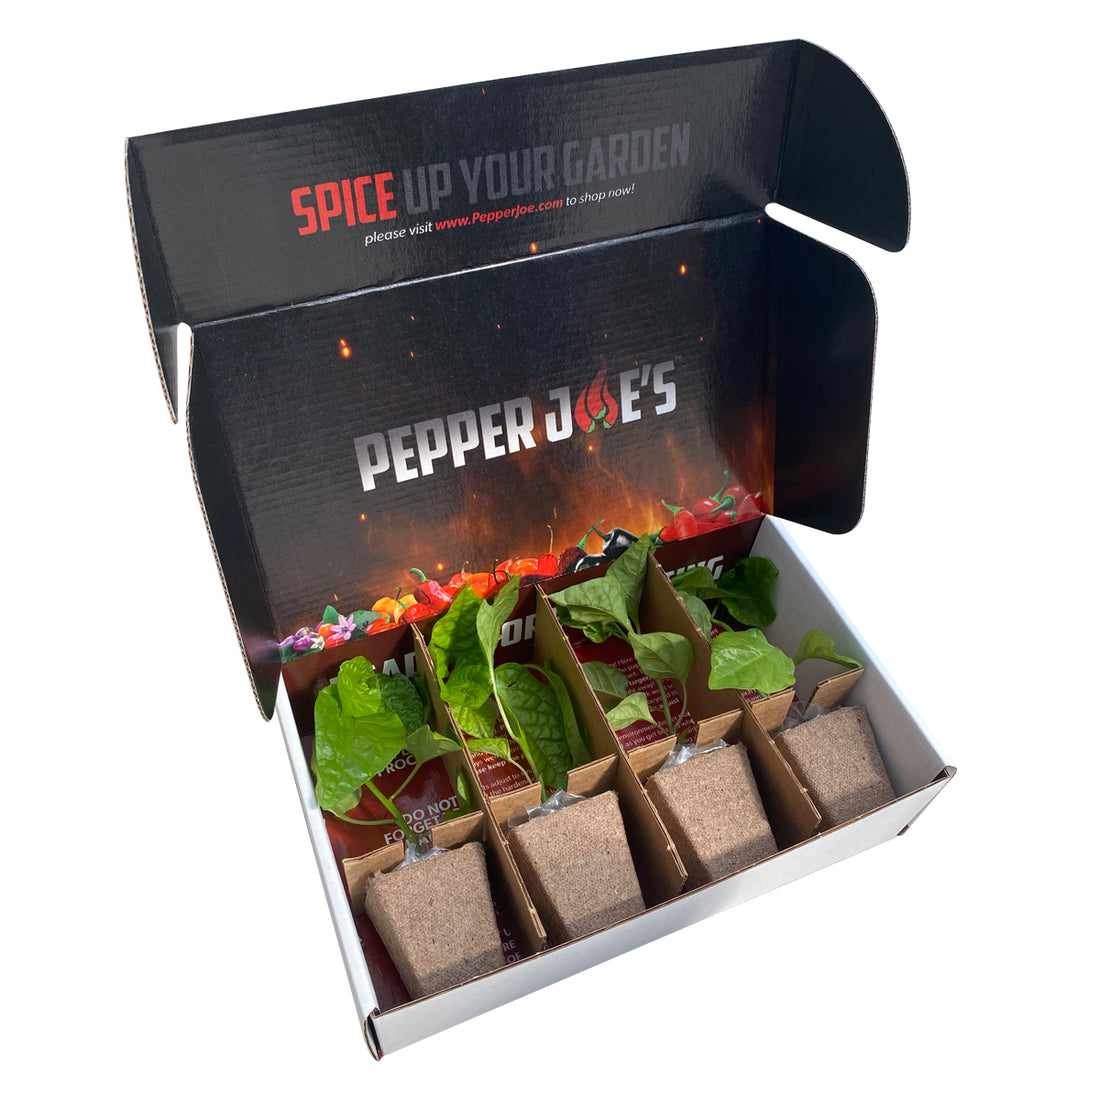 live pepper plants in shipping box from pepper joe's